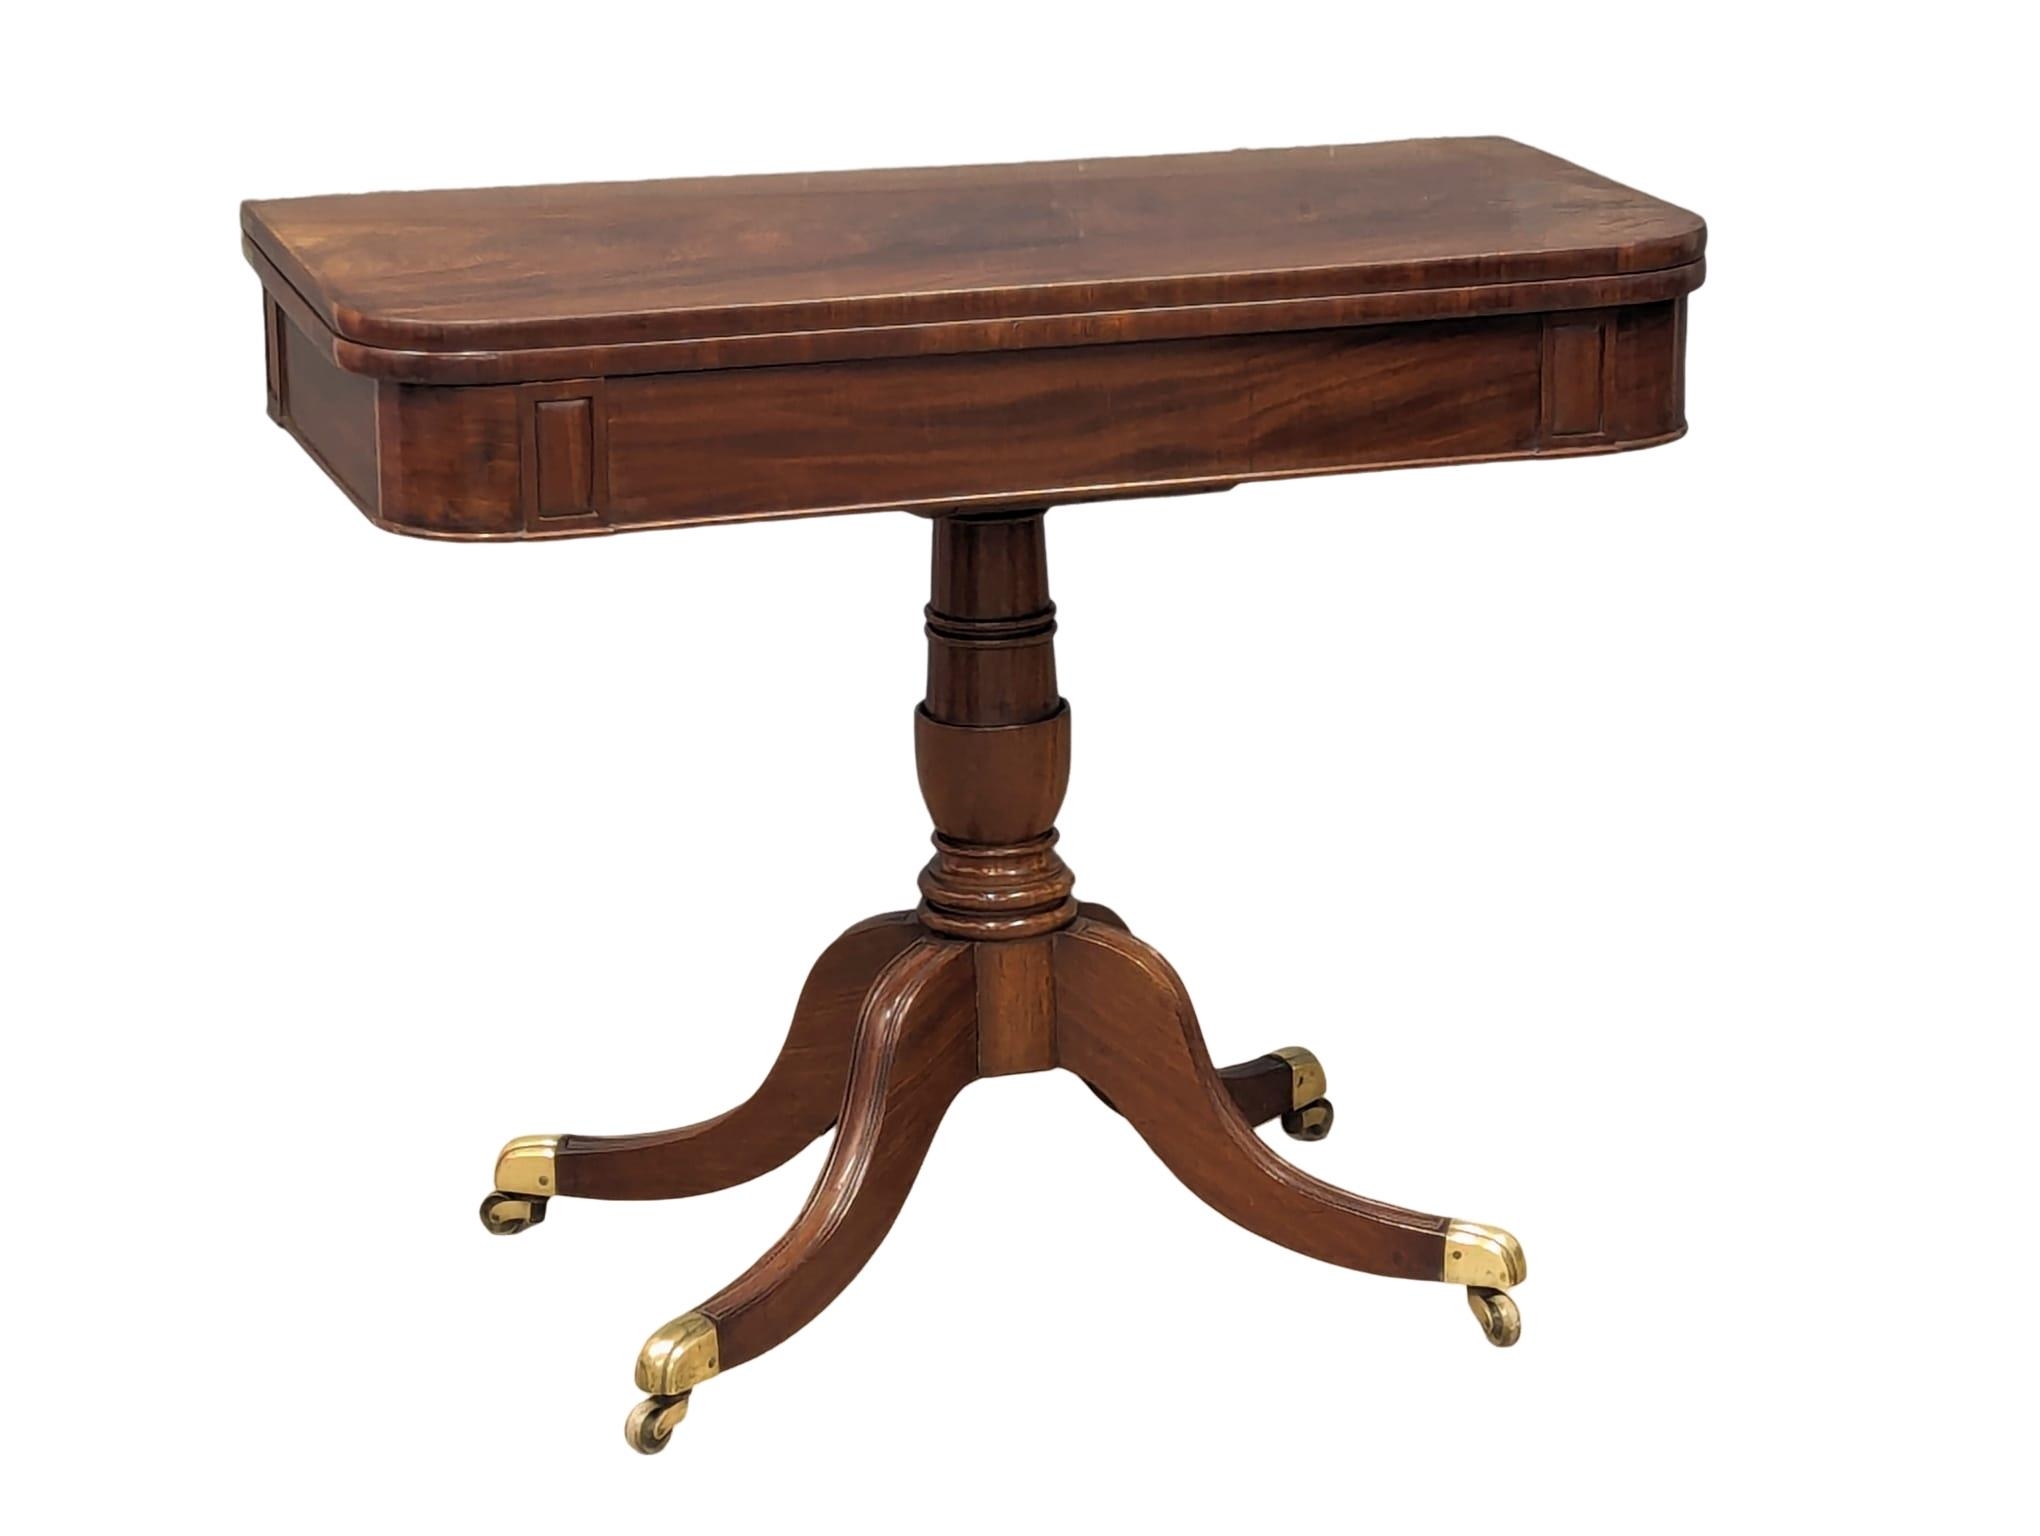 A late George III mahogany turnover games table on brass cup casters. 90.5x44.5x74.5cm